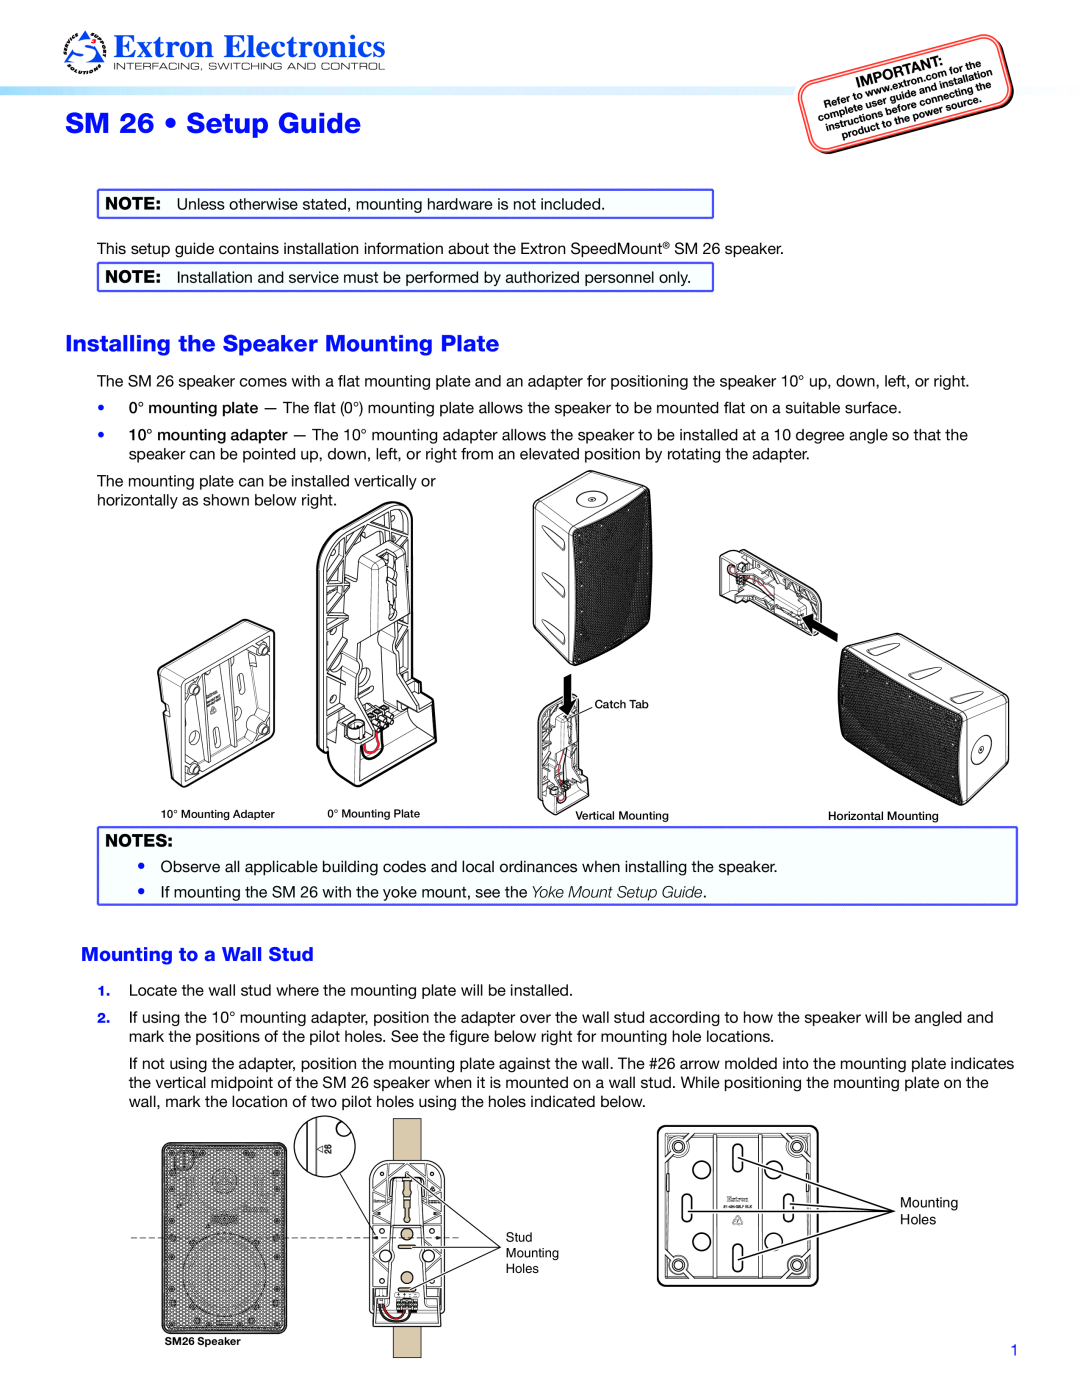 Extron electronic SM 26 manual User Guide, SpeedMount Surface Mount Speakers 